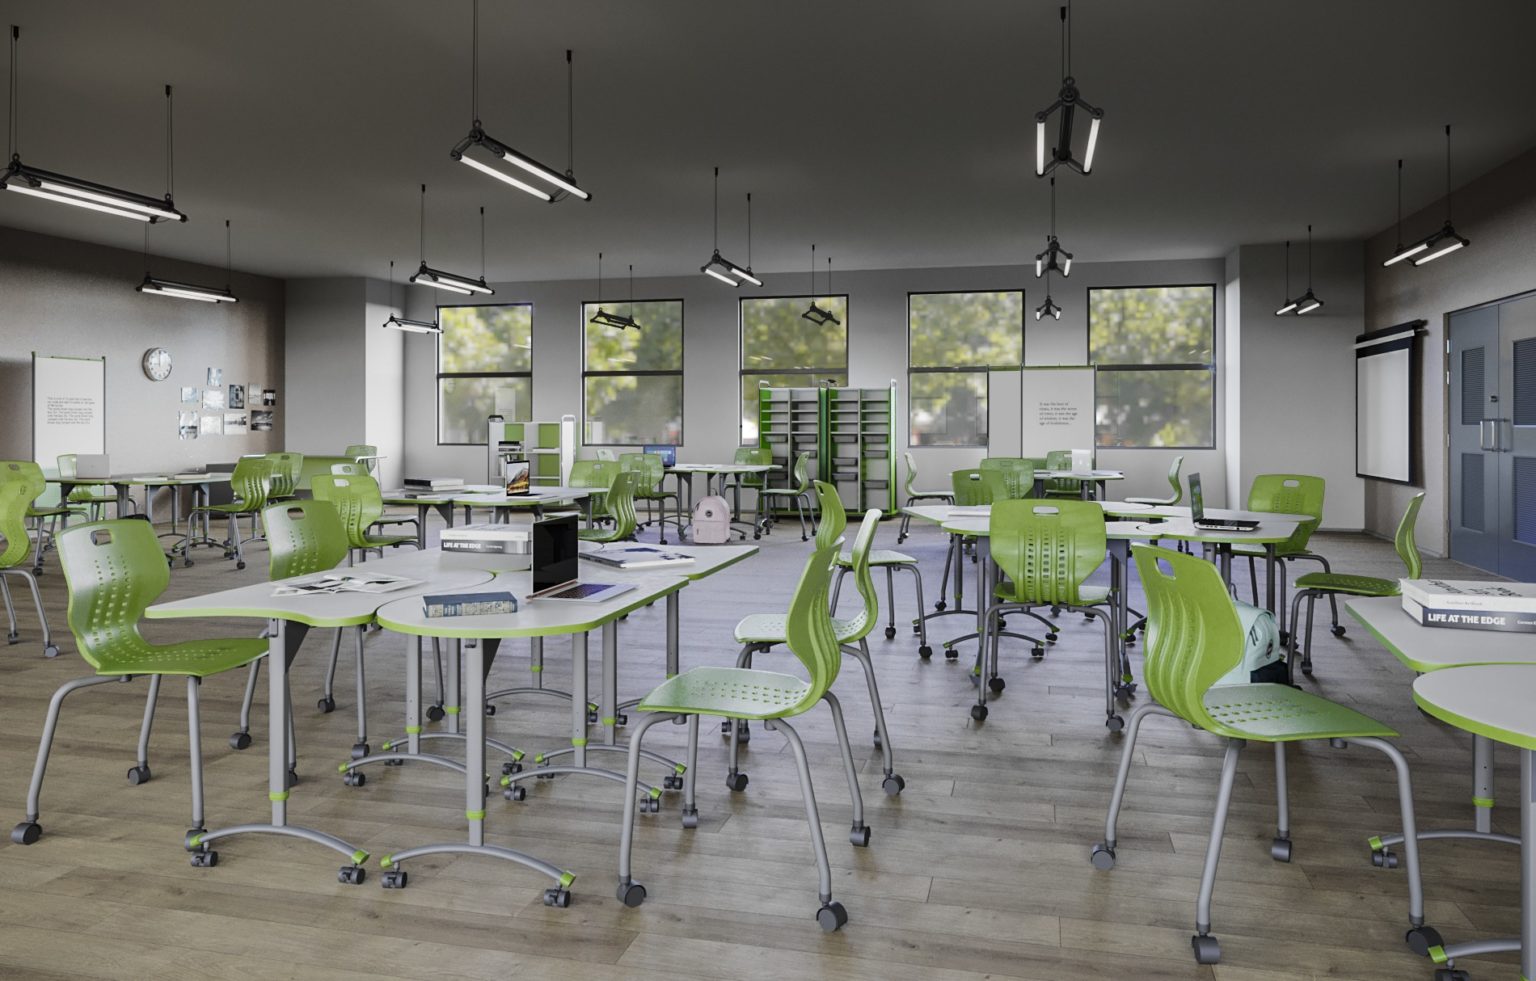 21st Century Classroom Learning Space - Paragon Furniture